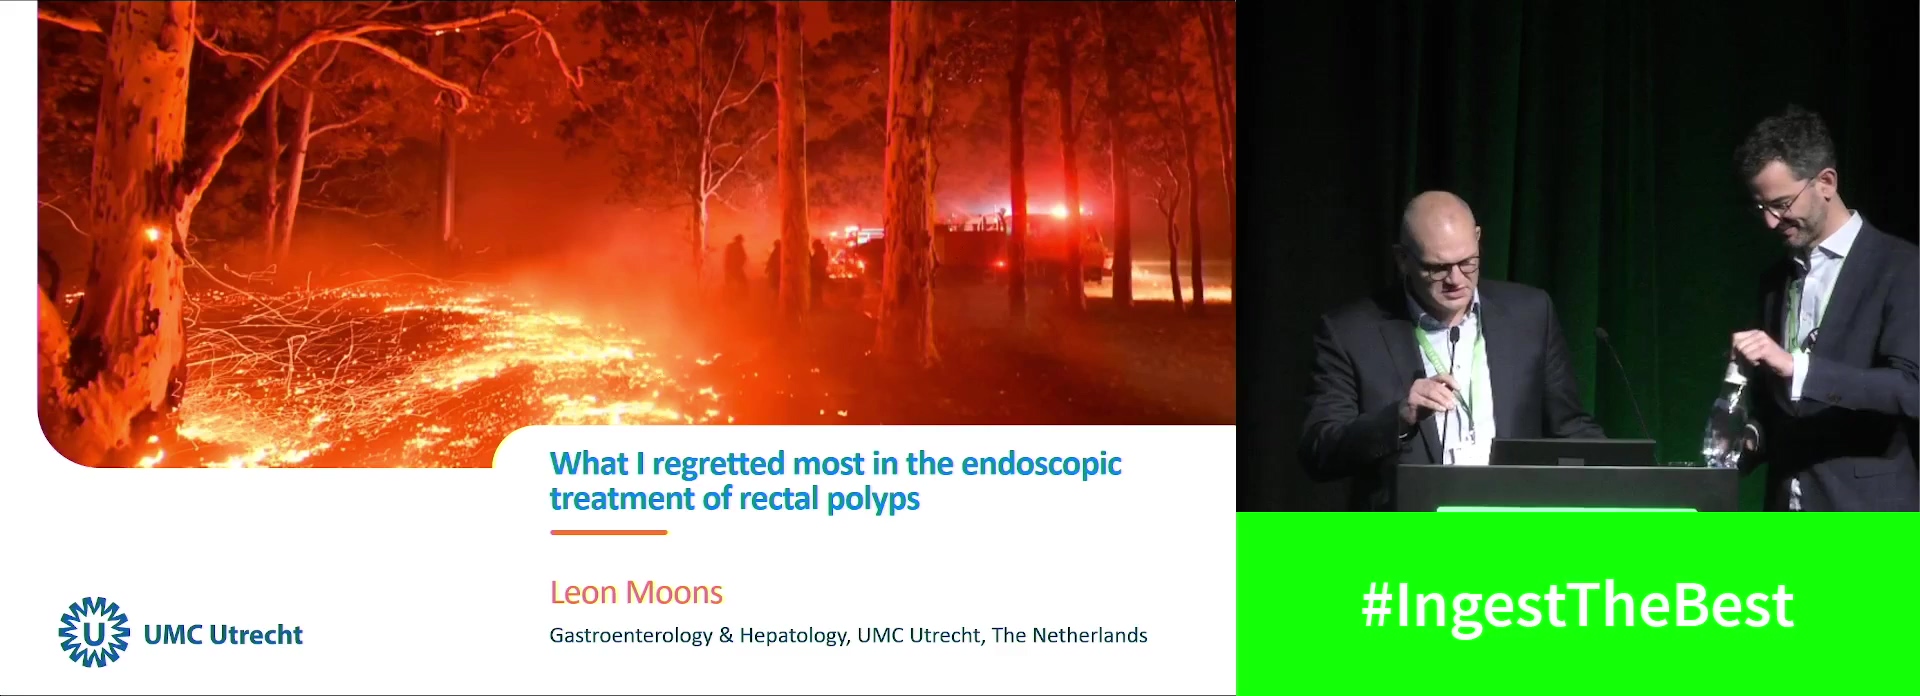 What I regretted most in endoscopic and surgical treatment of rectal polyps